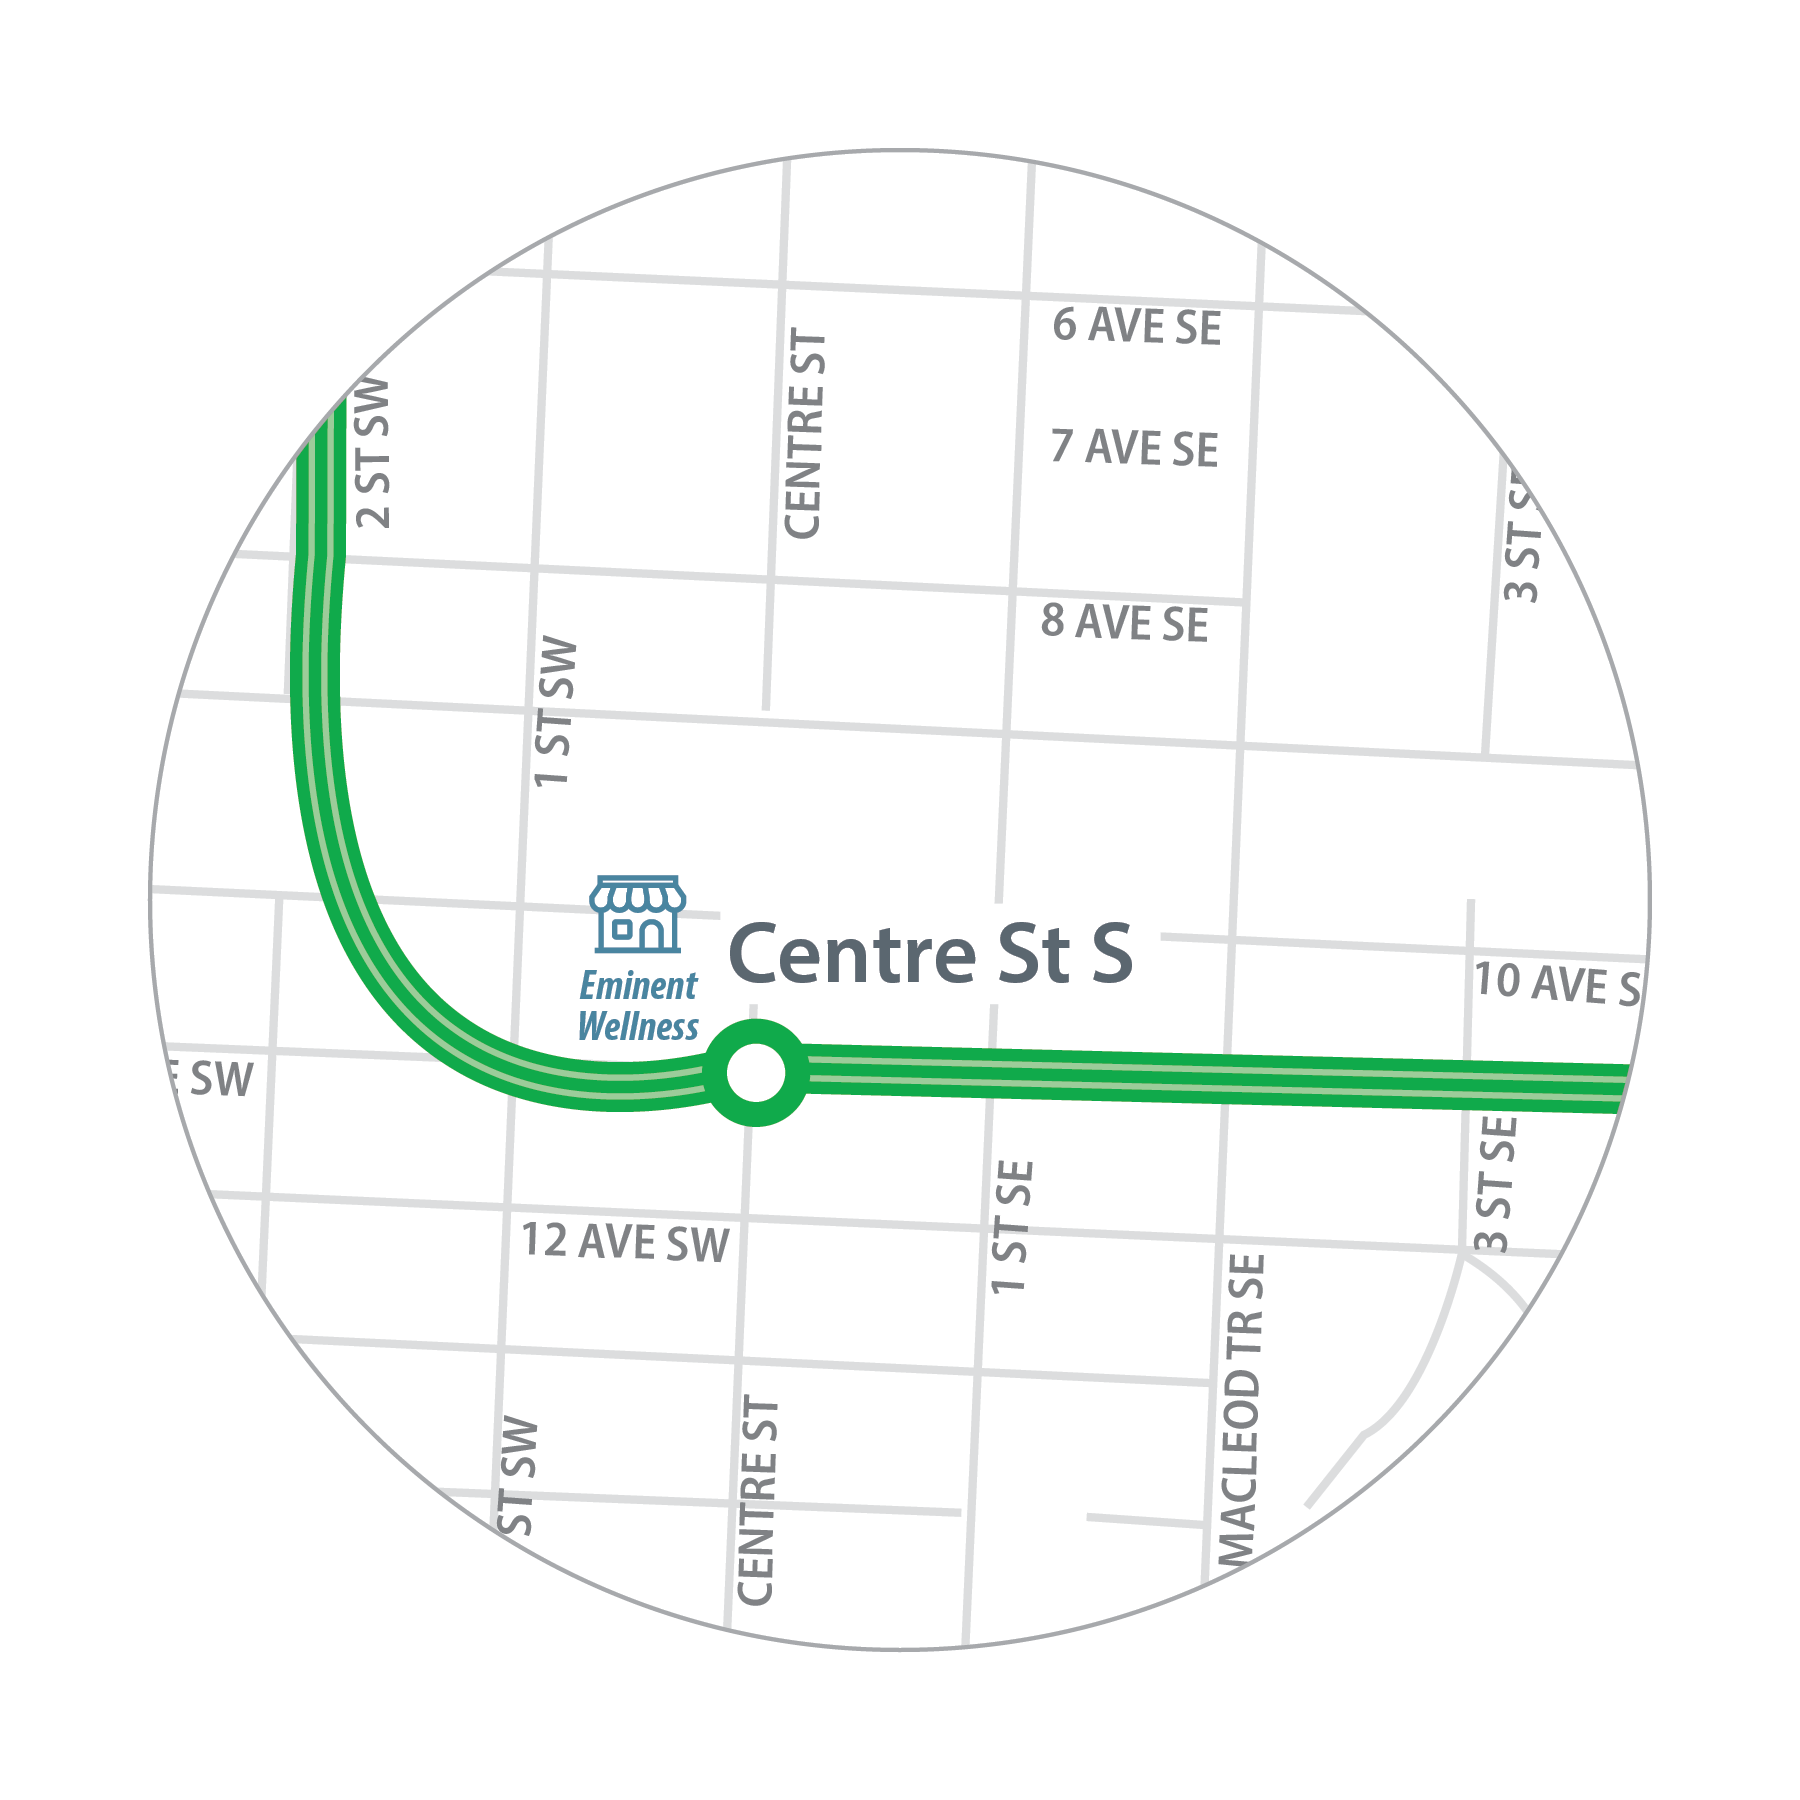 Map of Eminent Wellness location in relation to Centre Street S. Station.